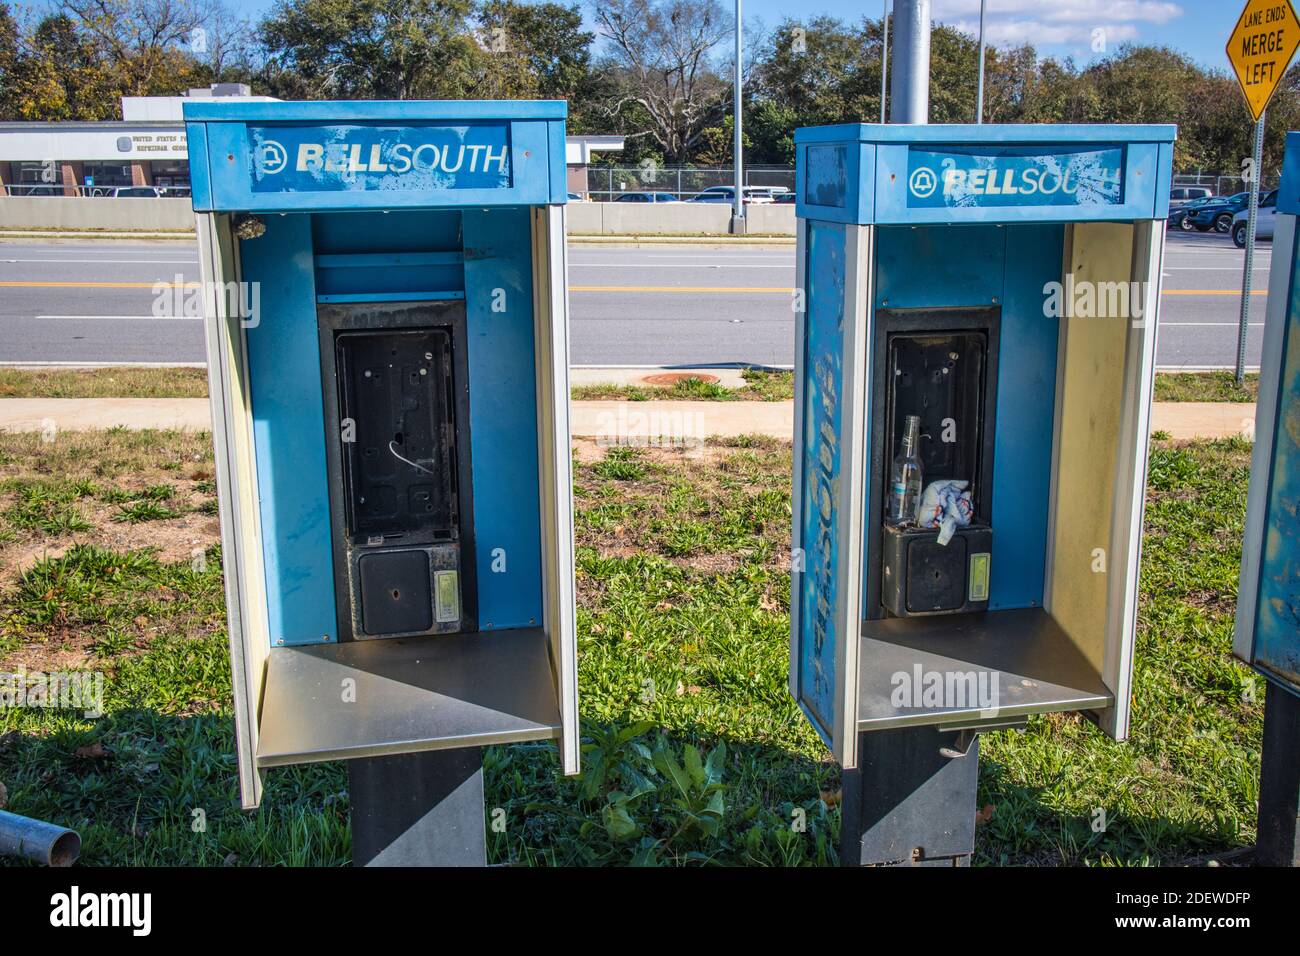 Hephzibah, Ga USA - 12 01 20: A row of old payphone booths with the phone missing vintage trash close up Stock Photo